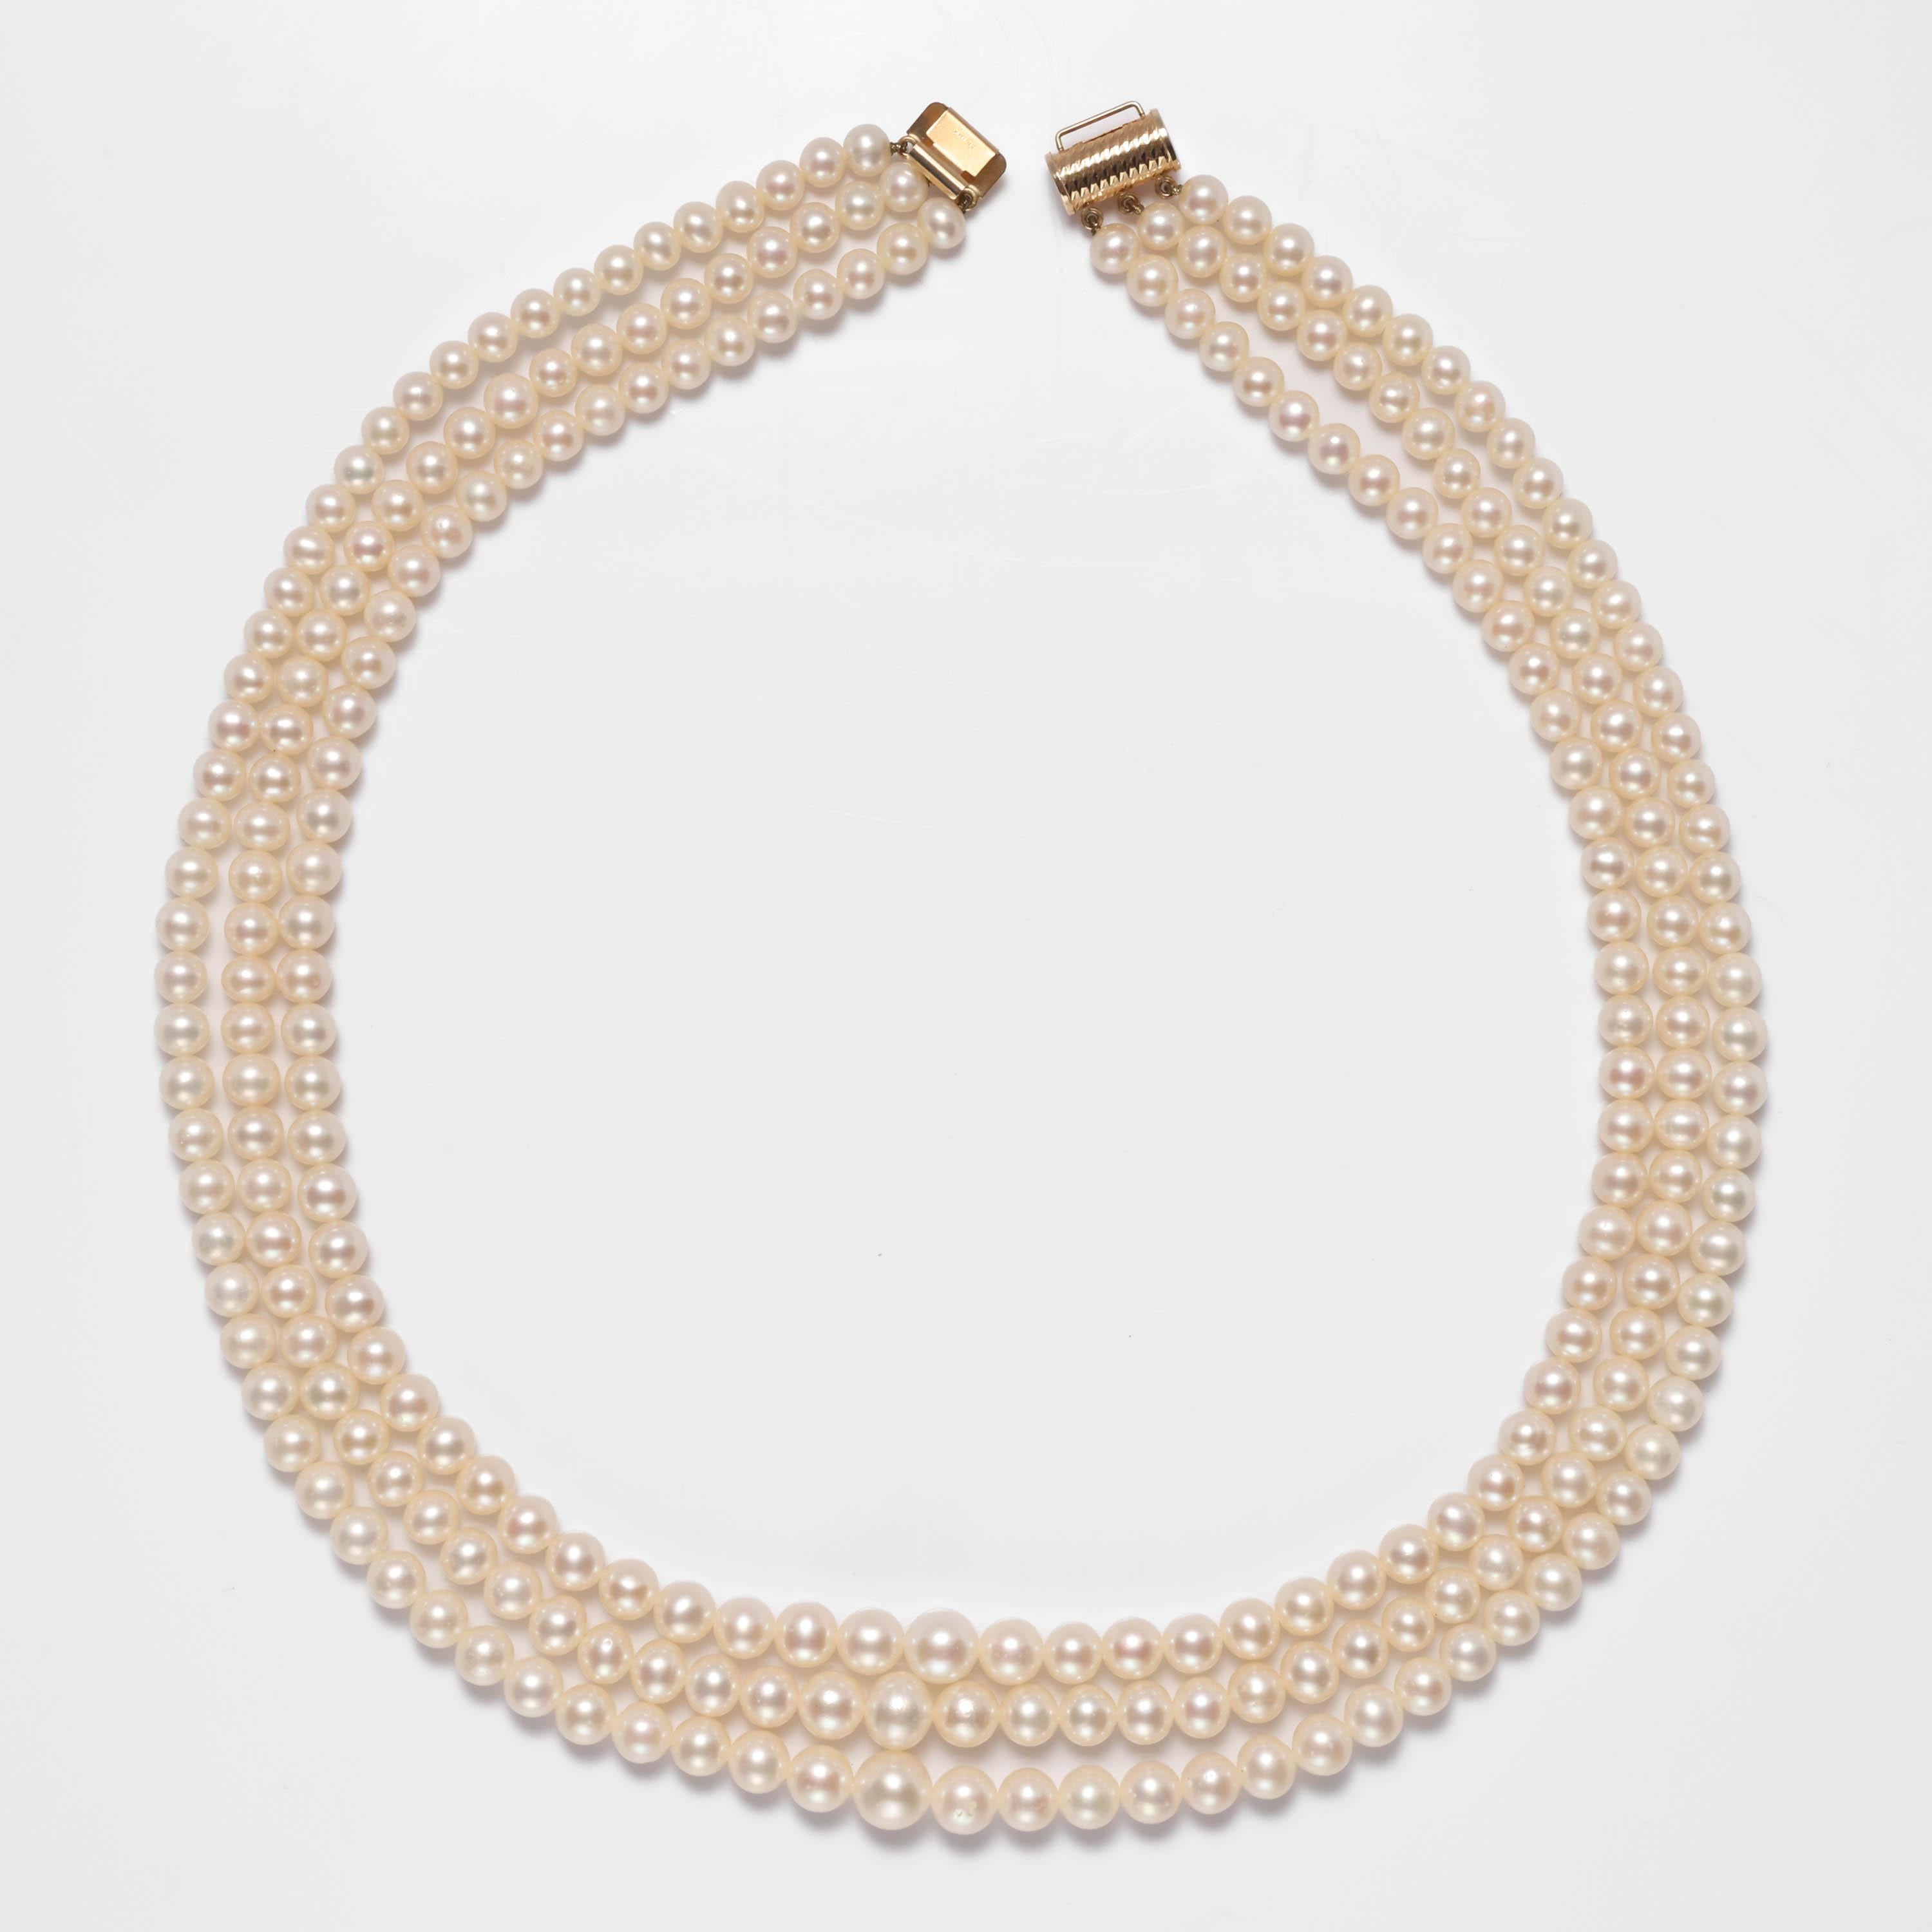 This triple-strand cultured Akoya pearl necklace hails from the glamorous early 1970s. Think: Lauren Hutton, Halston, Studio 54. 

The necklace is entirely original and in pristine condition. The gleaming, lustrous cultured Akoya sea pearls range in